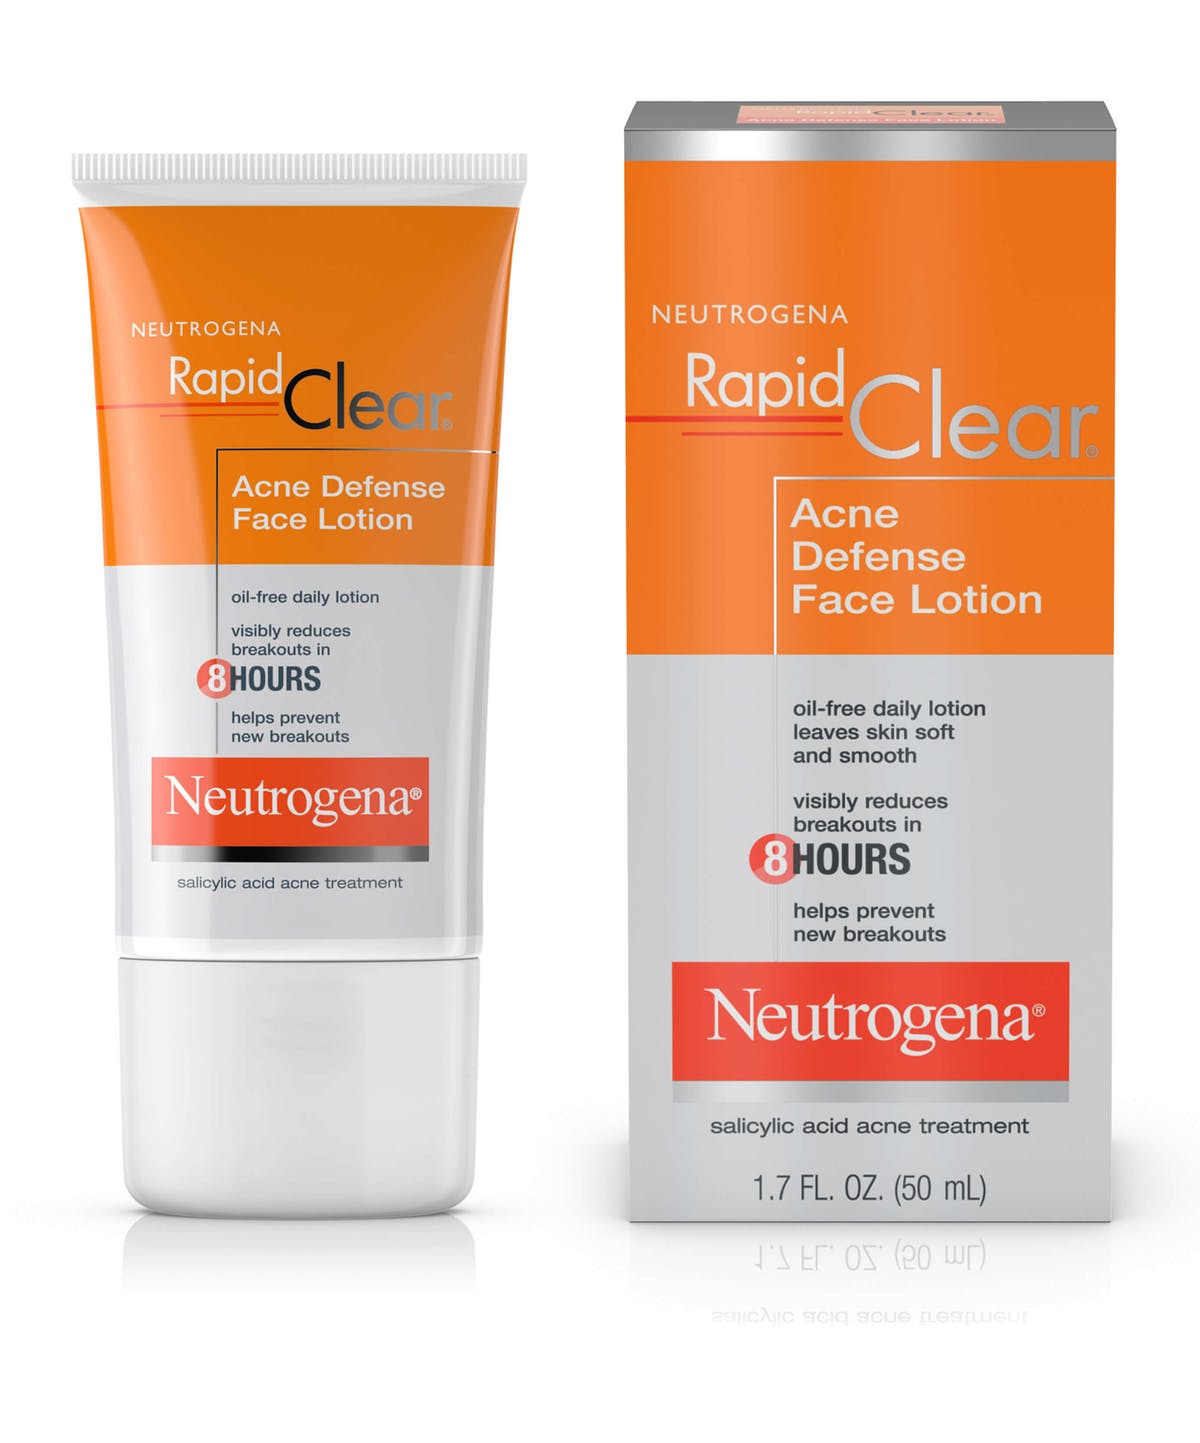 Rapid Clear Acne Defense Oil-Free Face Lotion & Moisturizer Review